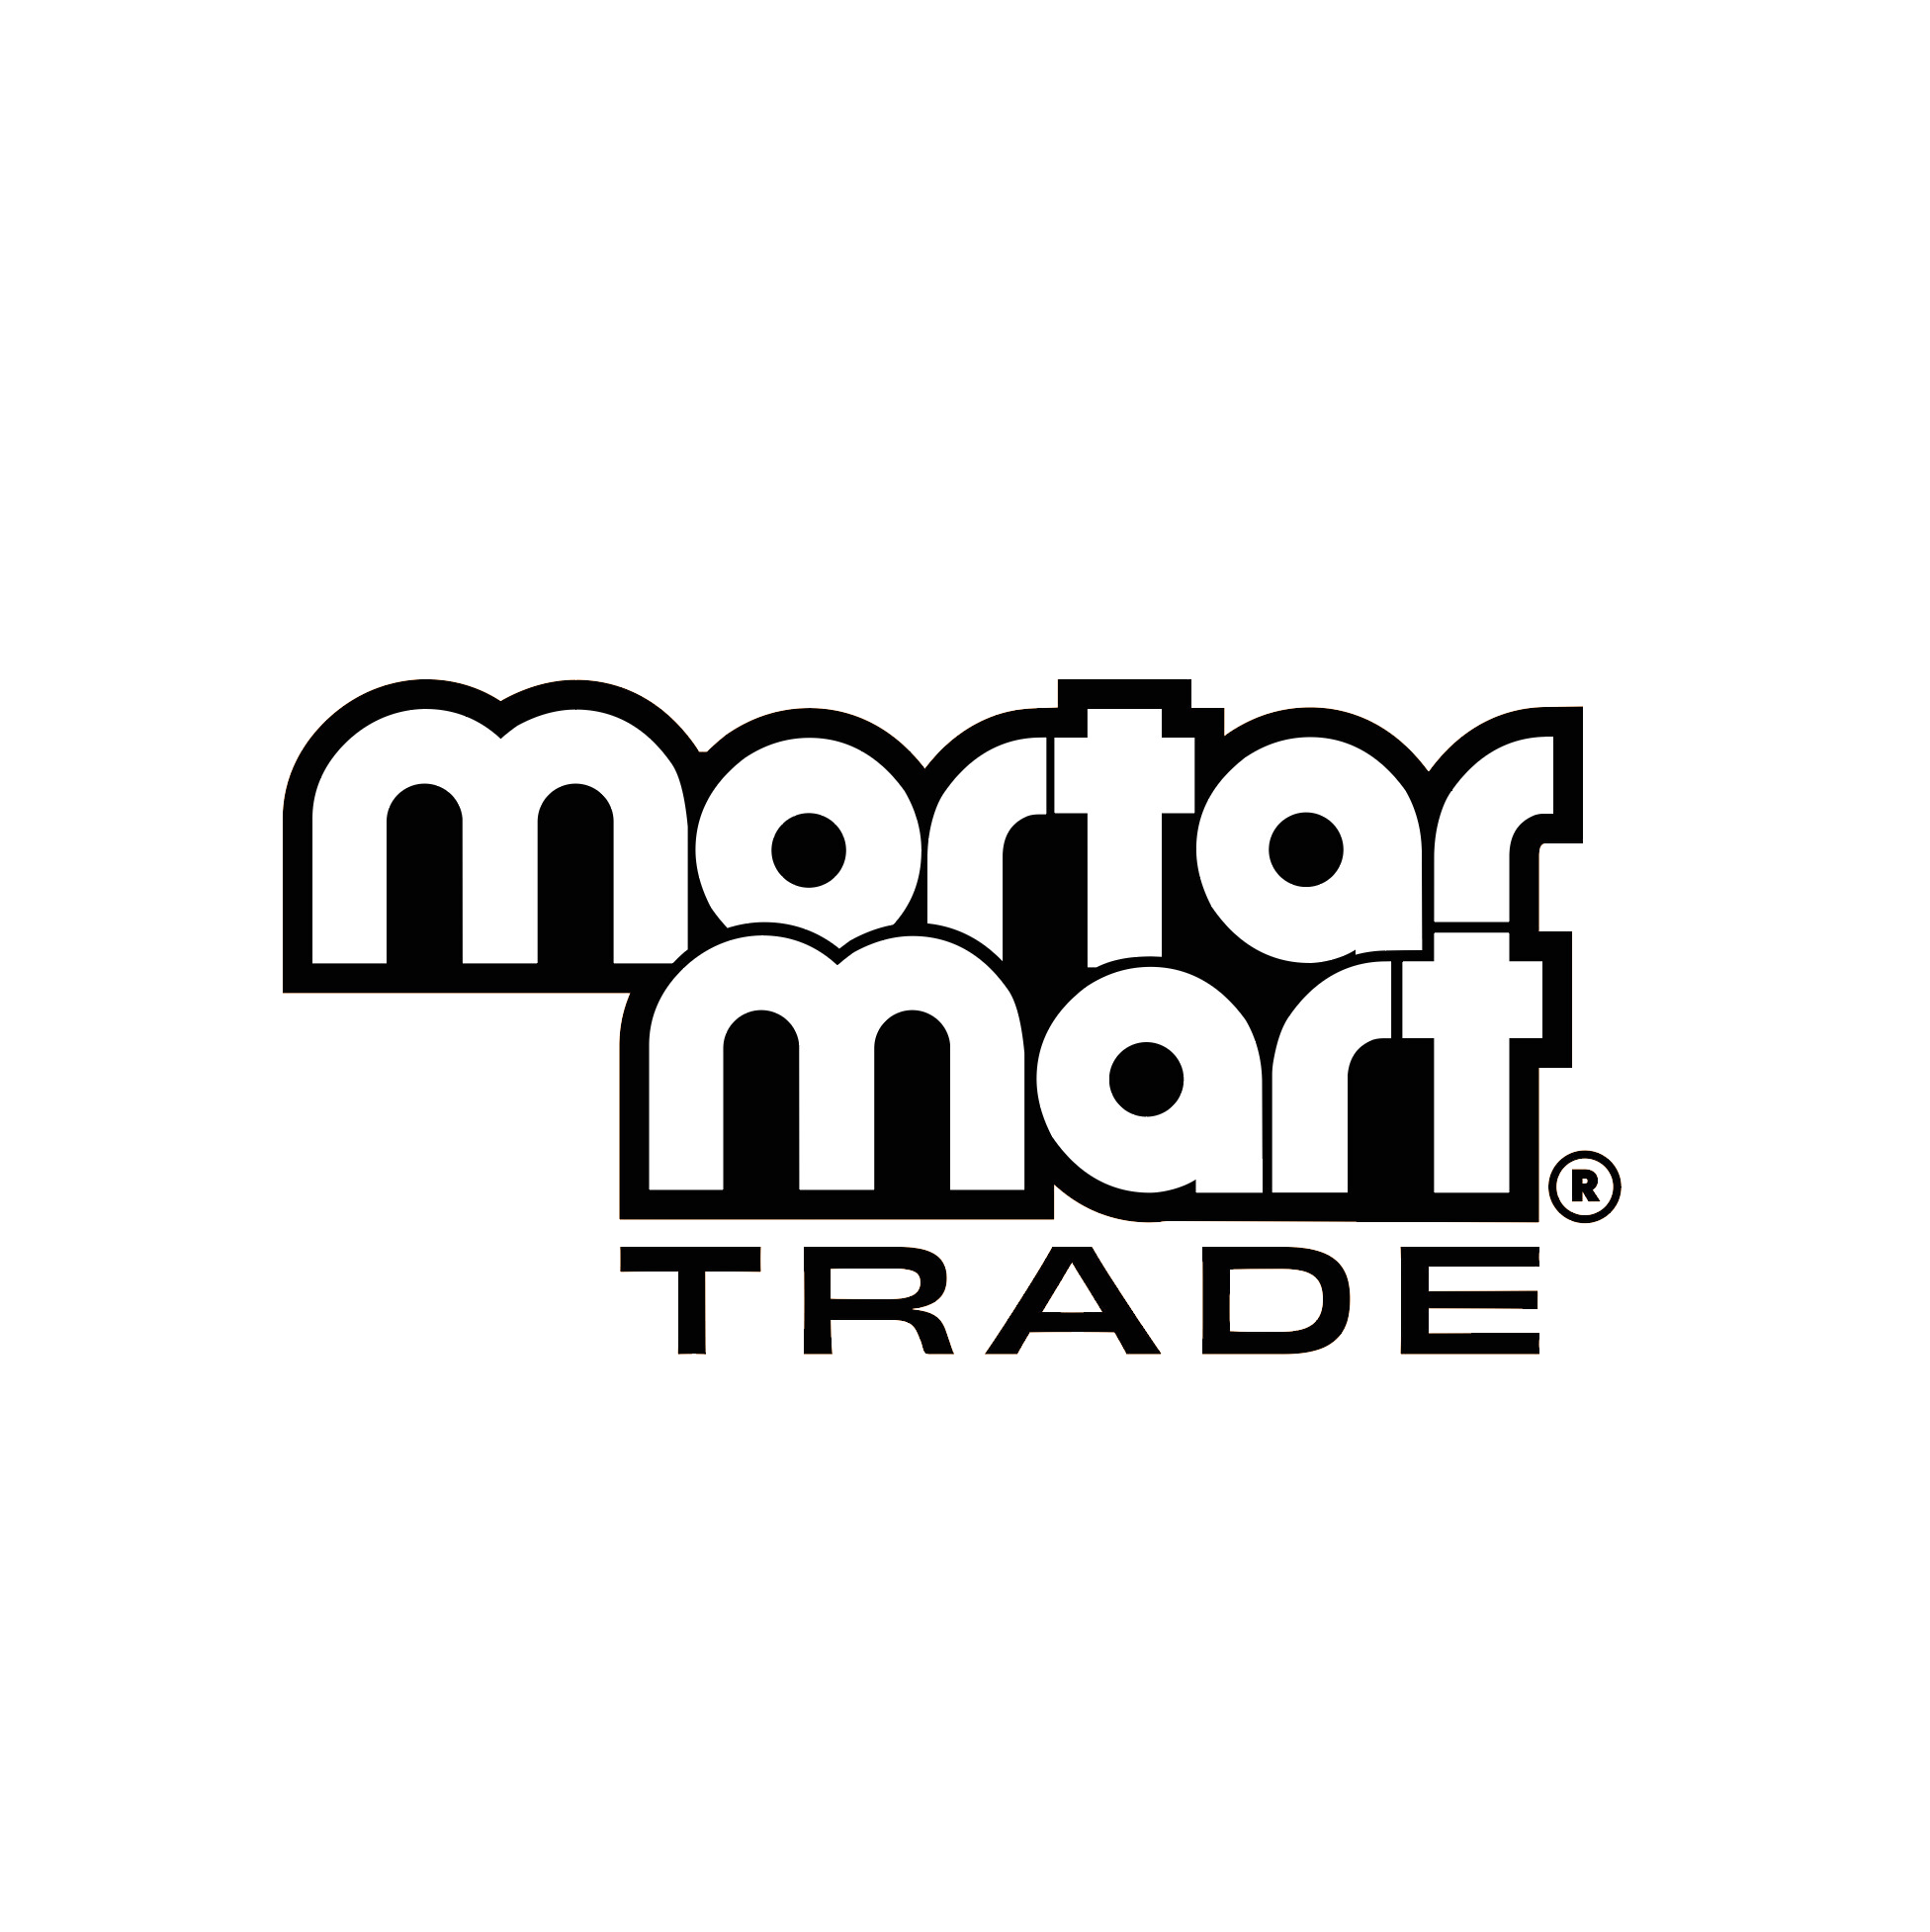 Mortar Mart Trade | Specialist suppliers to the Tiling, Landscape, Masonry, Waterproofing and Construction Industries logo